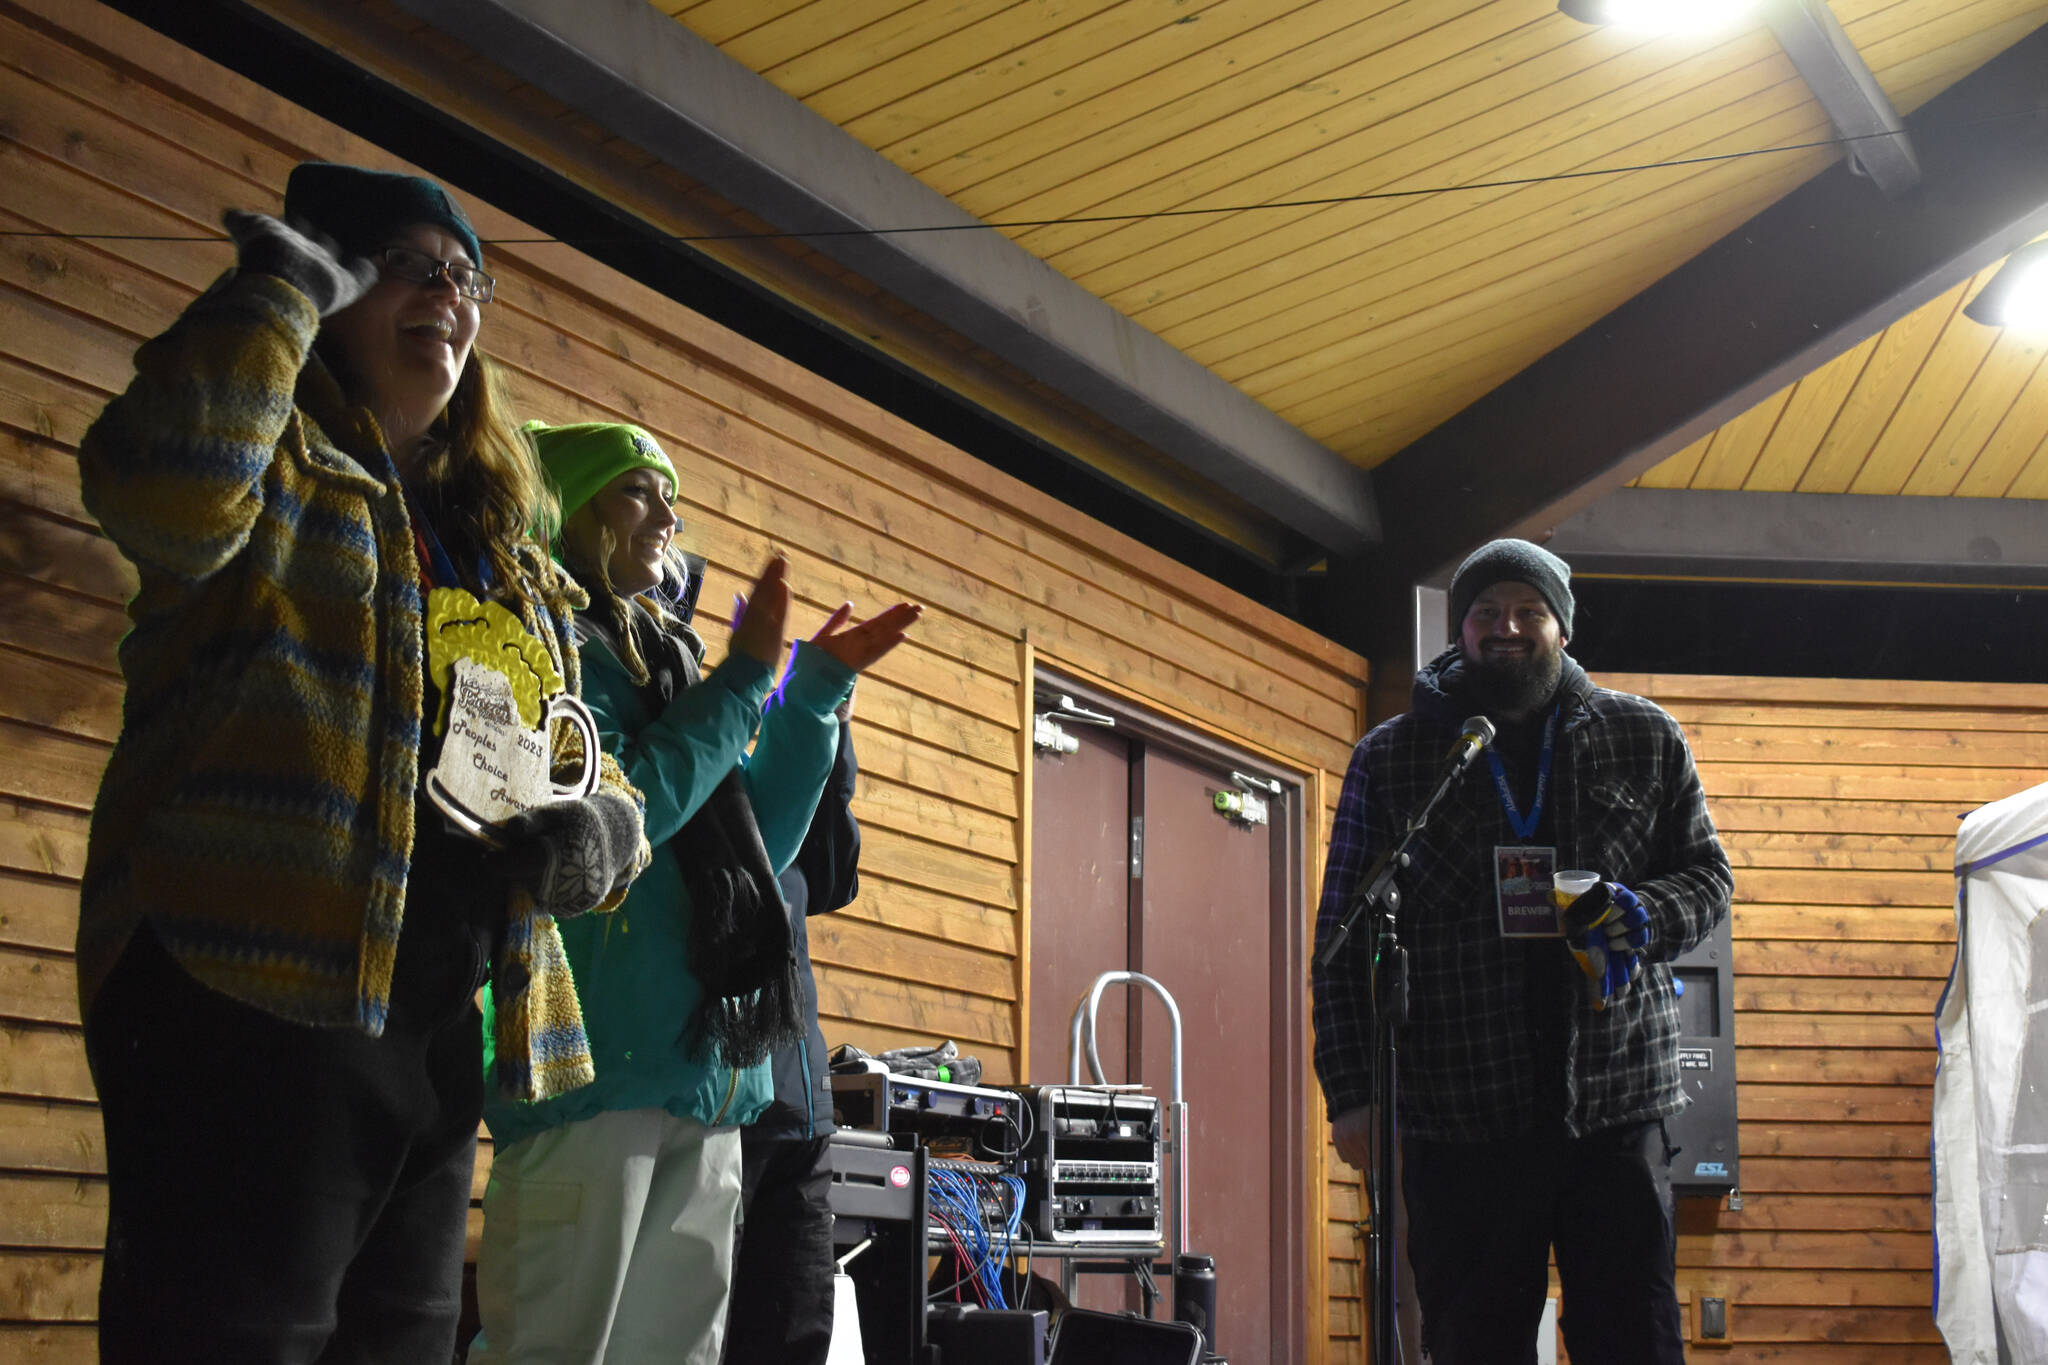 Naptowne Brewing Company is awarded the 2023 People’s Choice Award during Frozen RiverFest on Saturday, Feb. 18, 2023 at Soldotna Creek Park in Soldotna, Alaska. (Jake Dye/Peninsula Clarion)